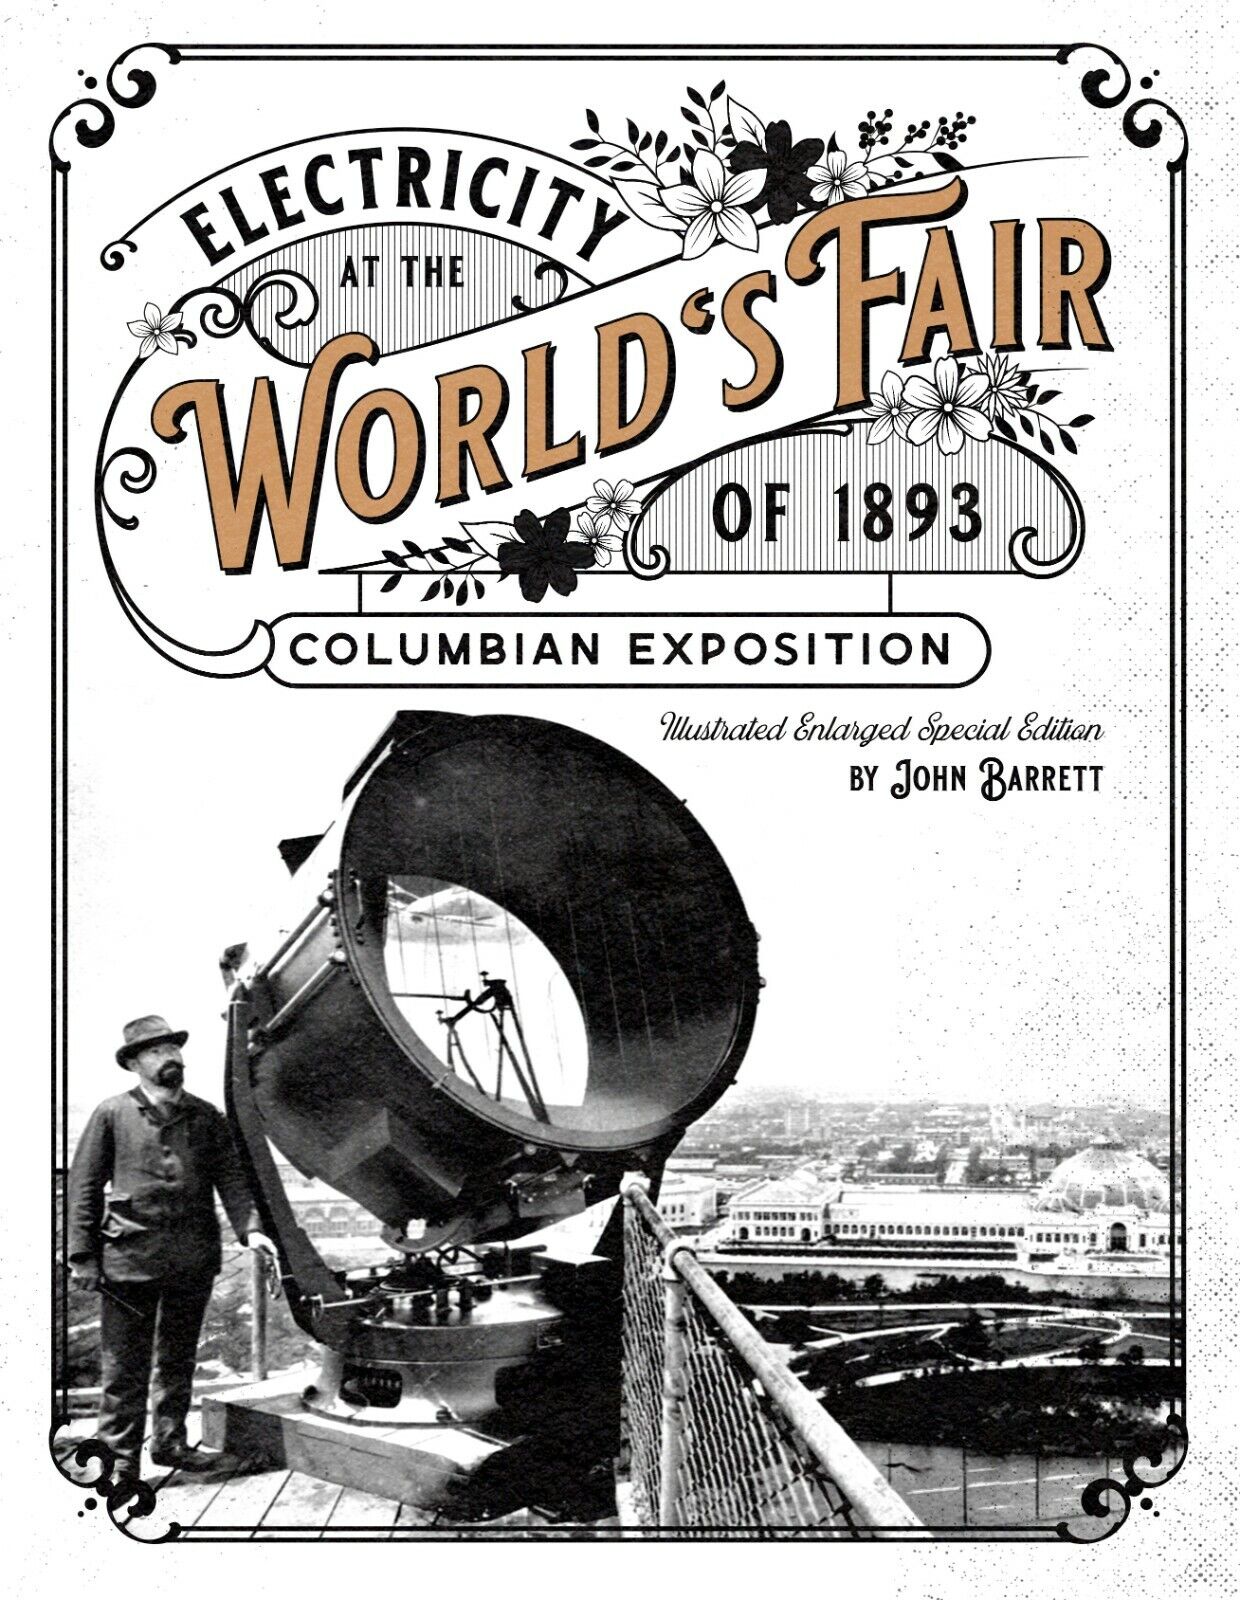 Electricity at the World’s Fair of 1893 Columbian Exposition Special Edition NEW